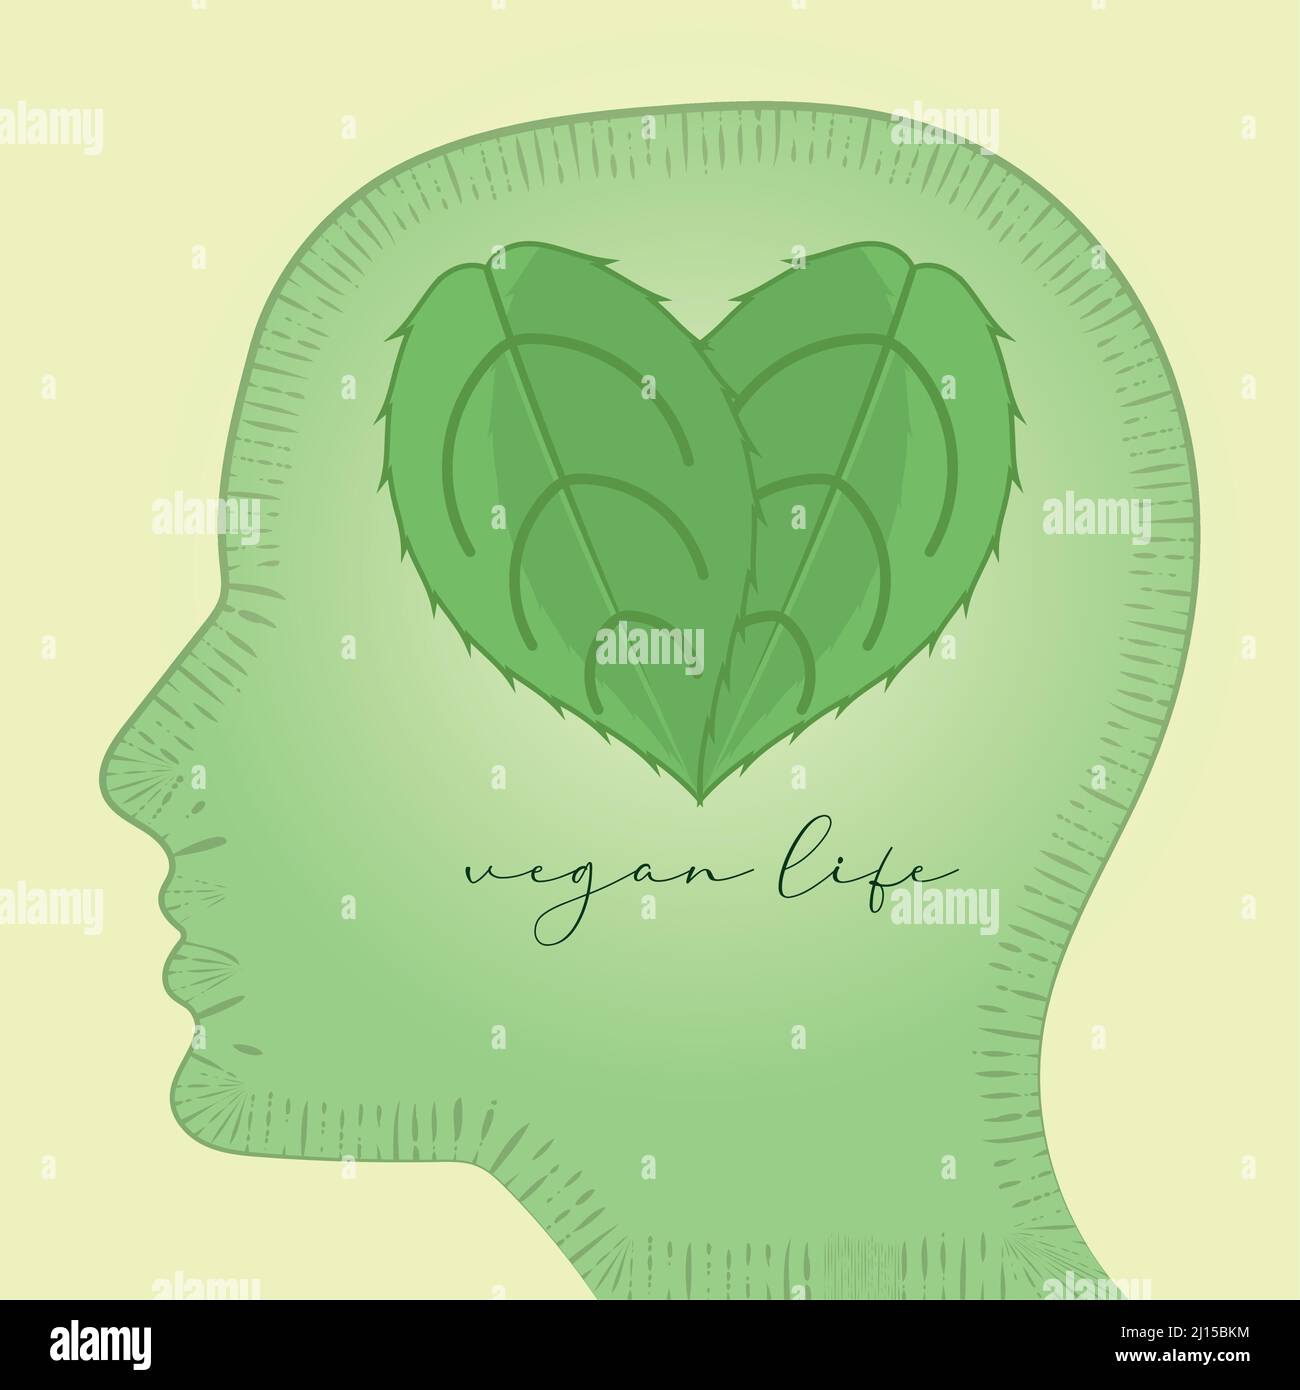 Side view of a head Brain composed by leaves Vegan lifestyle poster Vector Stock Vector